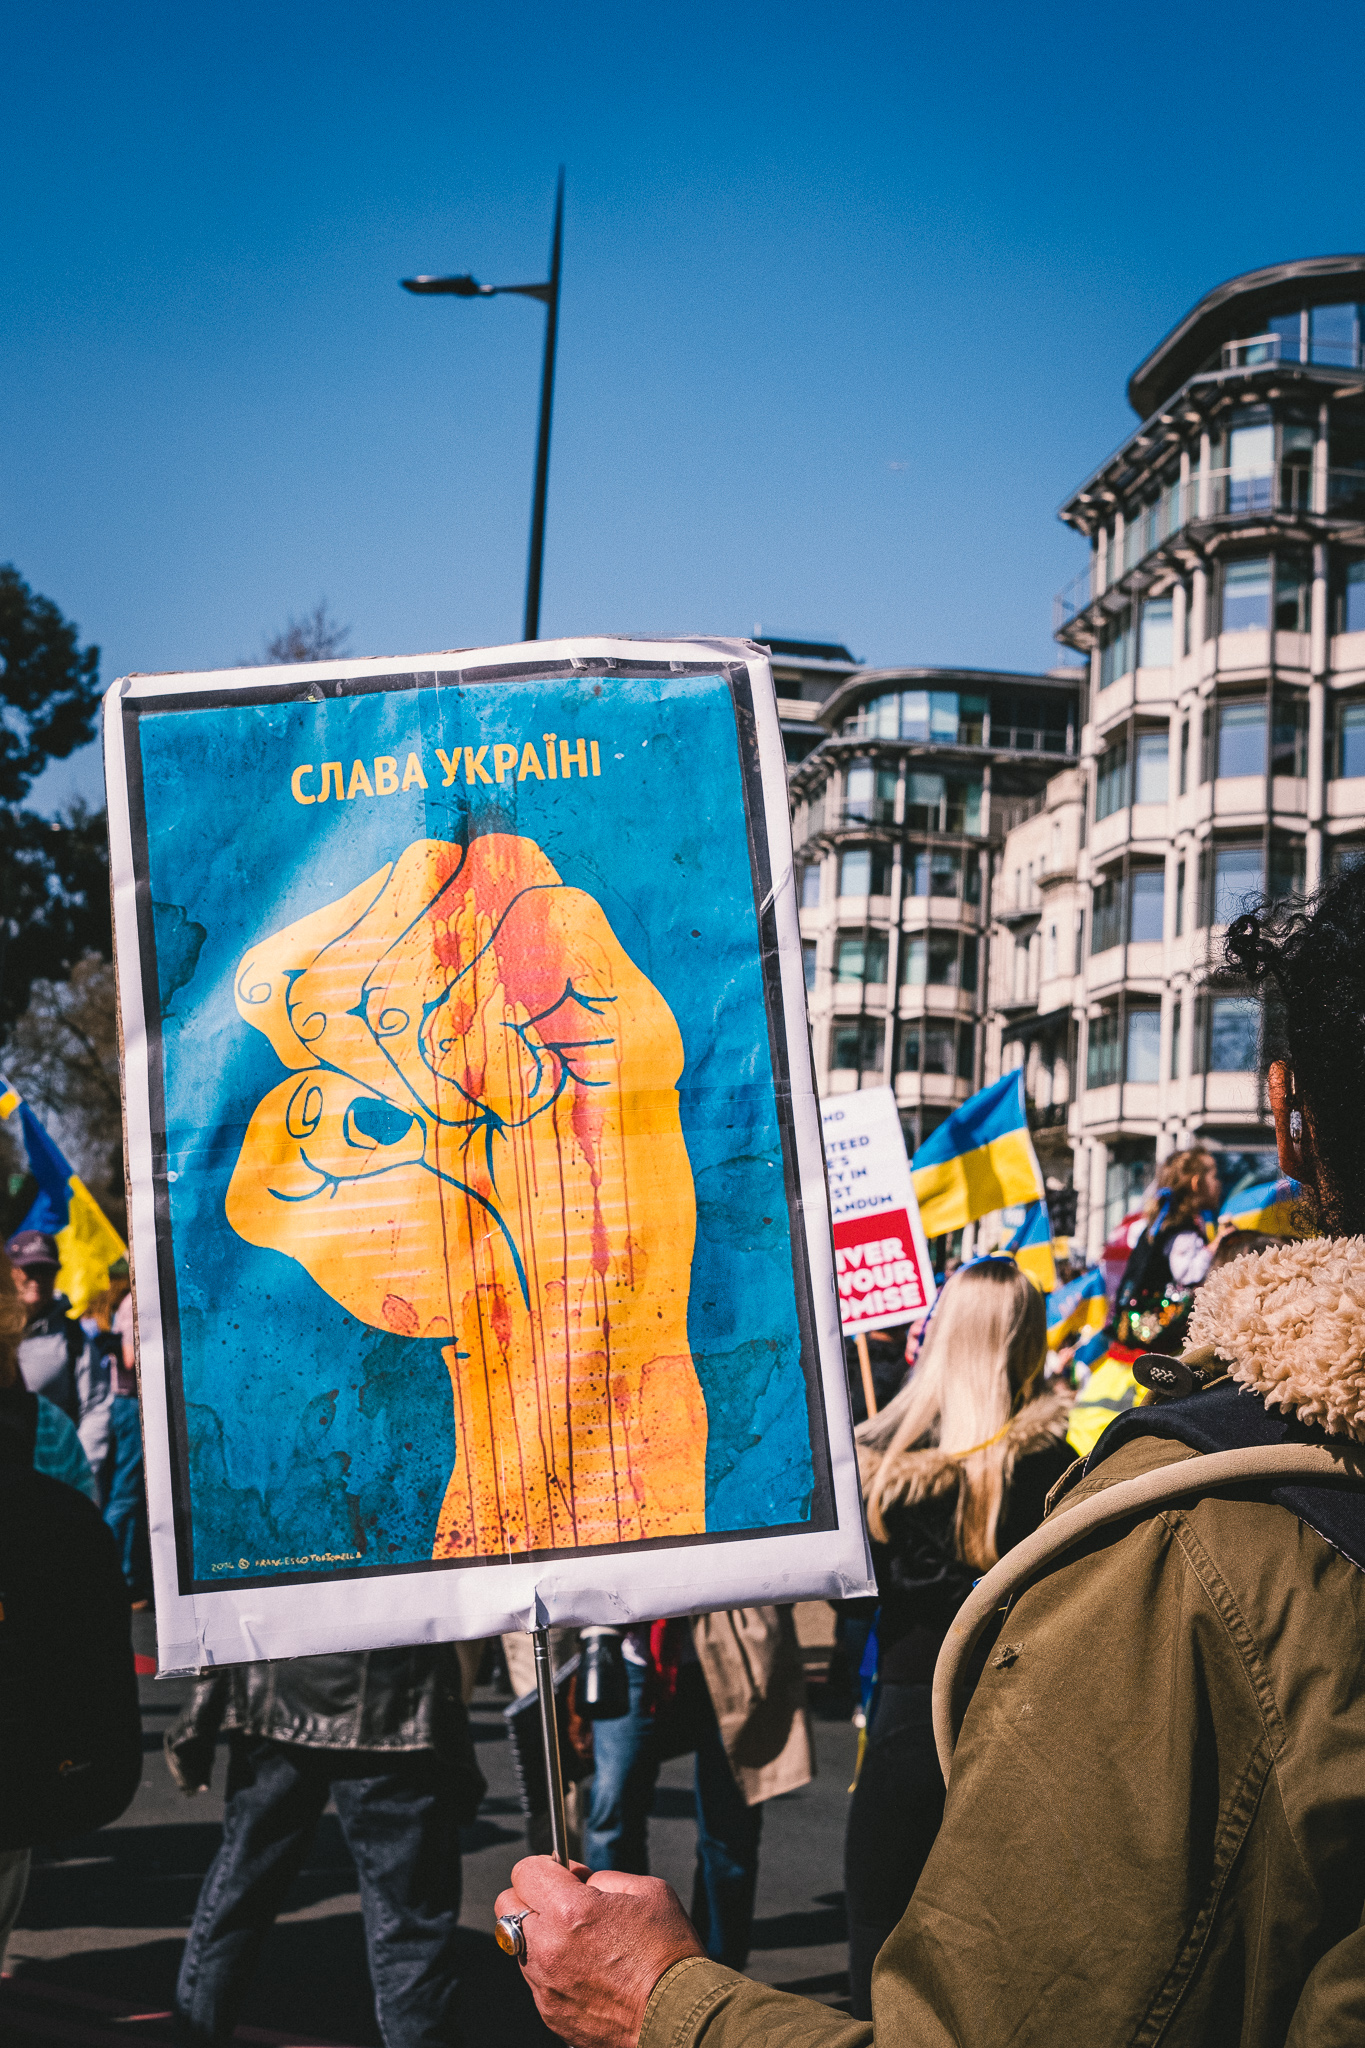 A banner showing a clutching fist in the colours of Ukrainian flag at the solidarity march in London